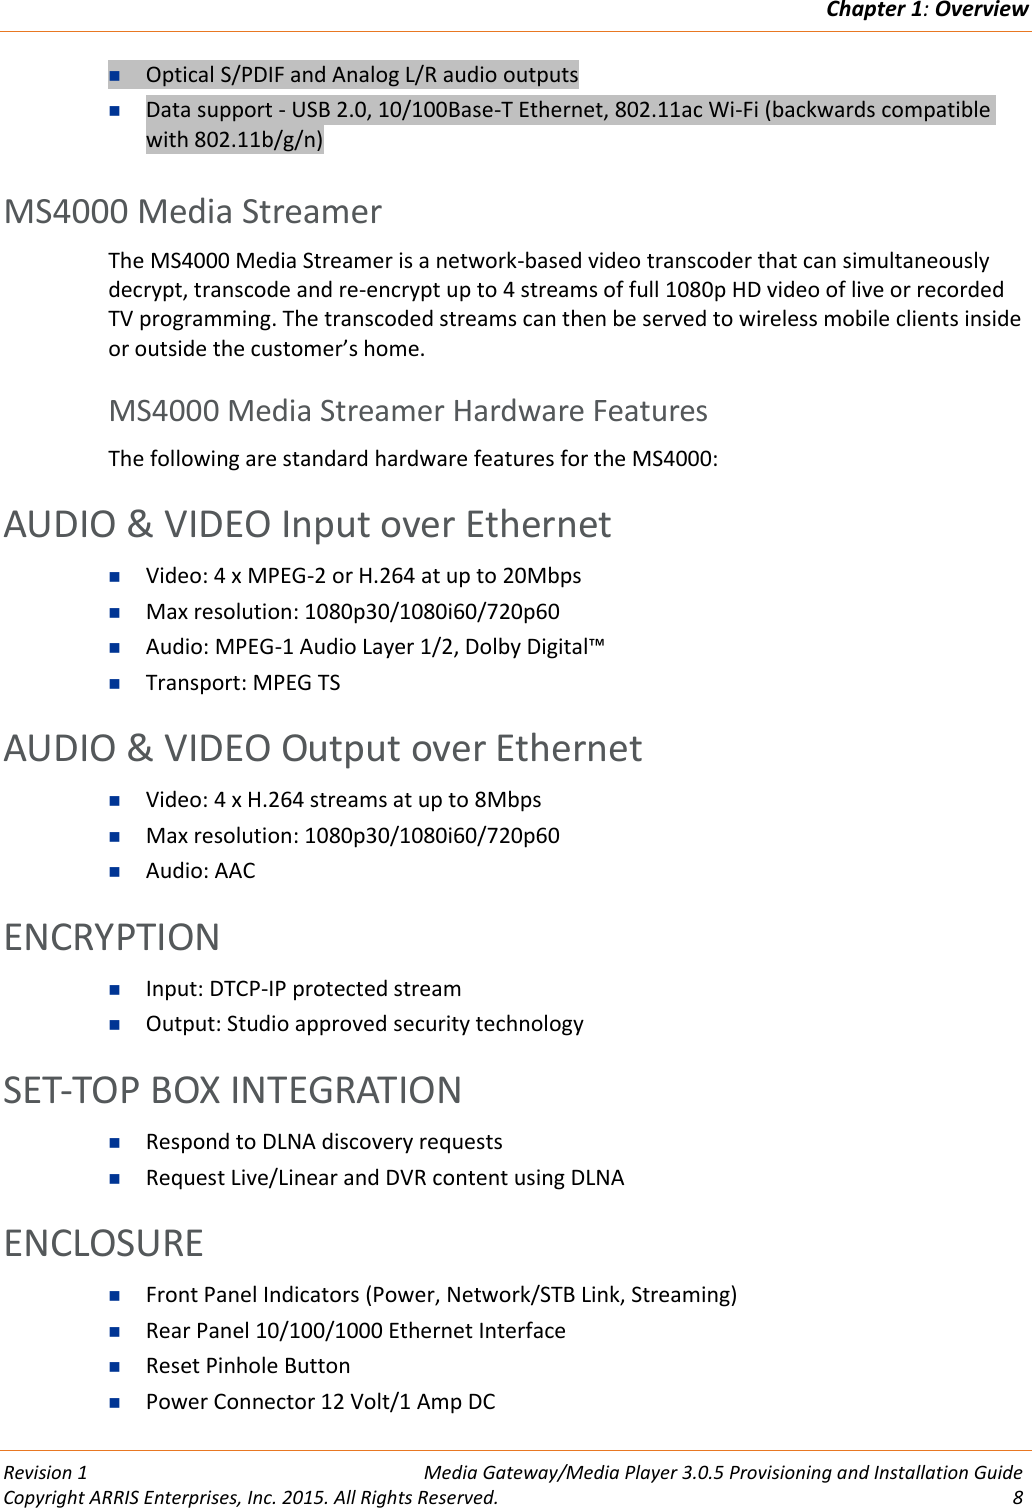 Chapter 1: Overview  Revision 1  Media Gateway/Media Player 3.0.5 Provisioning and Installation Guide Copyright ARRIS Enterprises, Inc. 2015. All Rights Reserved.  8   Optical S/PDIF and Analog L/R audio outputs  Data support - USB 2.0, 10/100Base-T Ethernet, 802.11ac Wi-Fi (backwards compatible with 802.11b/g/n)   MS4000 Media Streamer The MS4000 Media Streamer is a network-based video transcoder that can simultaneously decrypt, transcode and re-encrypt up to 4 streams of full 1080p HD video of live or recorded TV programming. The transcoded streams can then be served to wireless mobile clients inside or outside the customer’s home.   MS4000 Media Streamer Hardware Features The following are standard hardware features for the MS4000: AUDIO &amp; VIDEO Input over Ethernet  Video: 4 x MPEG-2 or H.264 at up to 20Mbps  Max resolution: 1080p30/1080i60/720p60  Audio: MPEG-1 Audio Layer 1/2, Dolby Digital™  Transport: MPEG TS AUDIO &amp; VIDEO Output over Ethernet  Video: 4 x H.264 streams at up to 8Mbps  Max resolution: 1080p30/1080i60/720p60  Audio: AAC ENCRYPTION  Input: DTCP-IP protected stream  Output: Studio approved security technology SET-TOP BOX INTEGRATION  Respond to DLNA discovery requests  Request Live/Linear and DVR content using DLNA ENCLOSURE  Front Panel Indicators (Power, Network/STB Link, Streaming)  Rear Panel 10/100/1000 Ethernet Interface  Reset Pinhole Button  Power Connector 12 Volt/1 Amp DC 